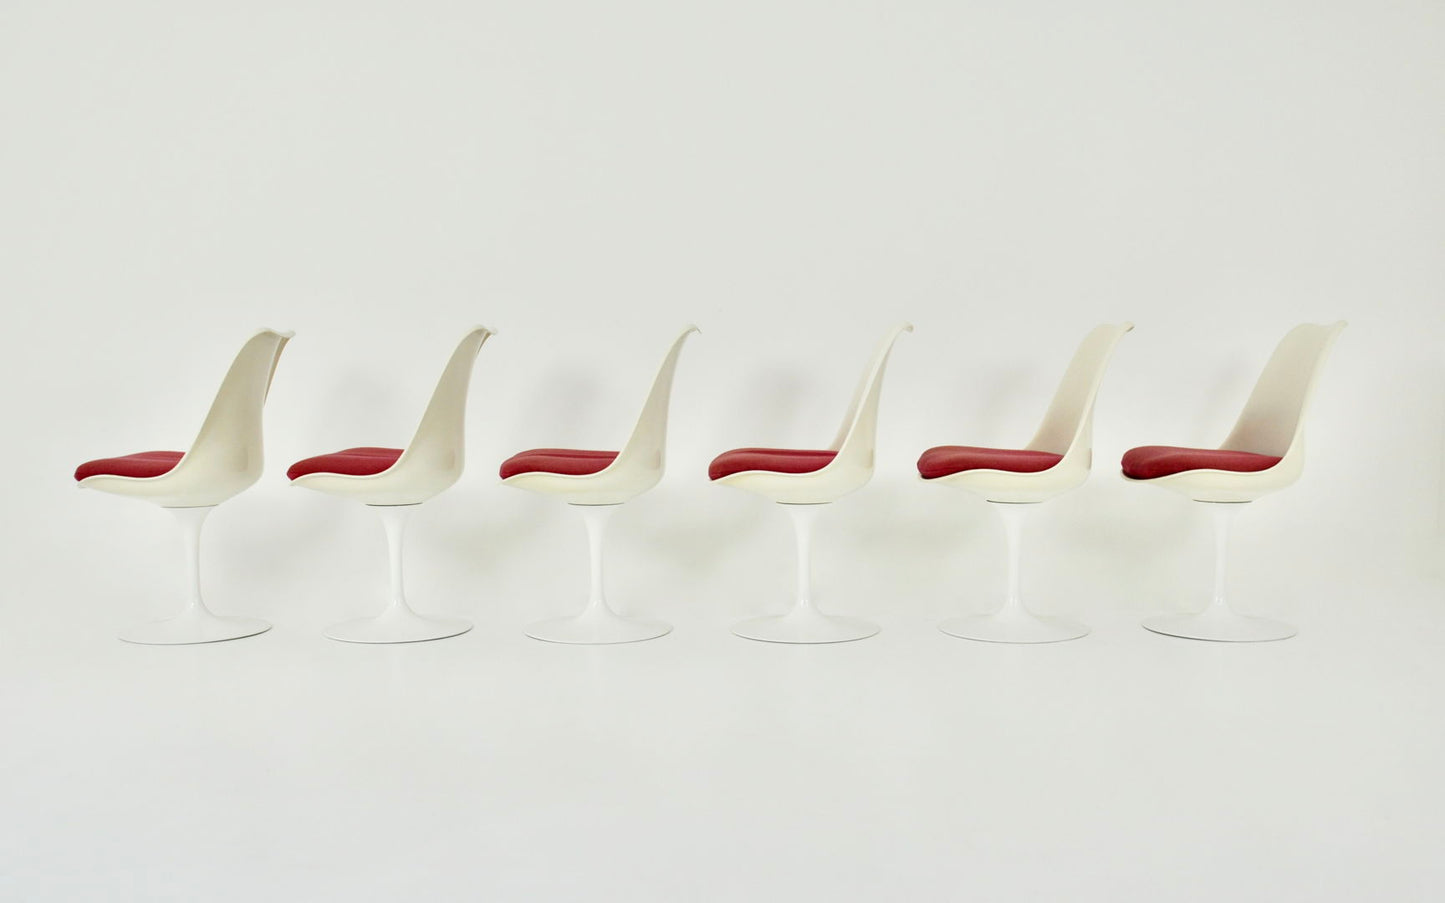 Tulip dining chairs by Eero Saarinen for Knoll International, 1970s, set of 6